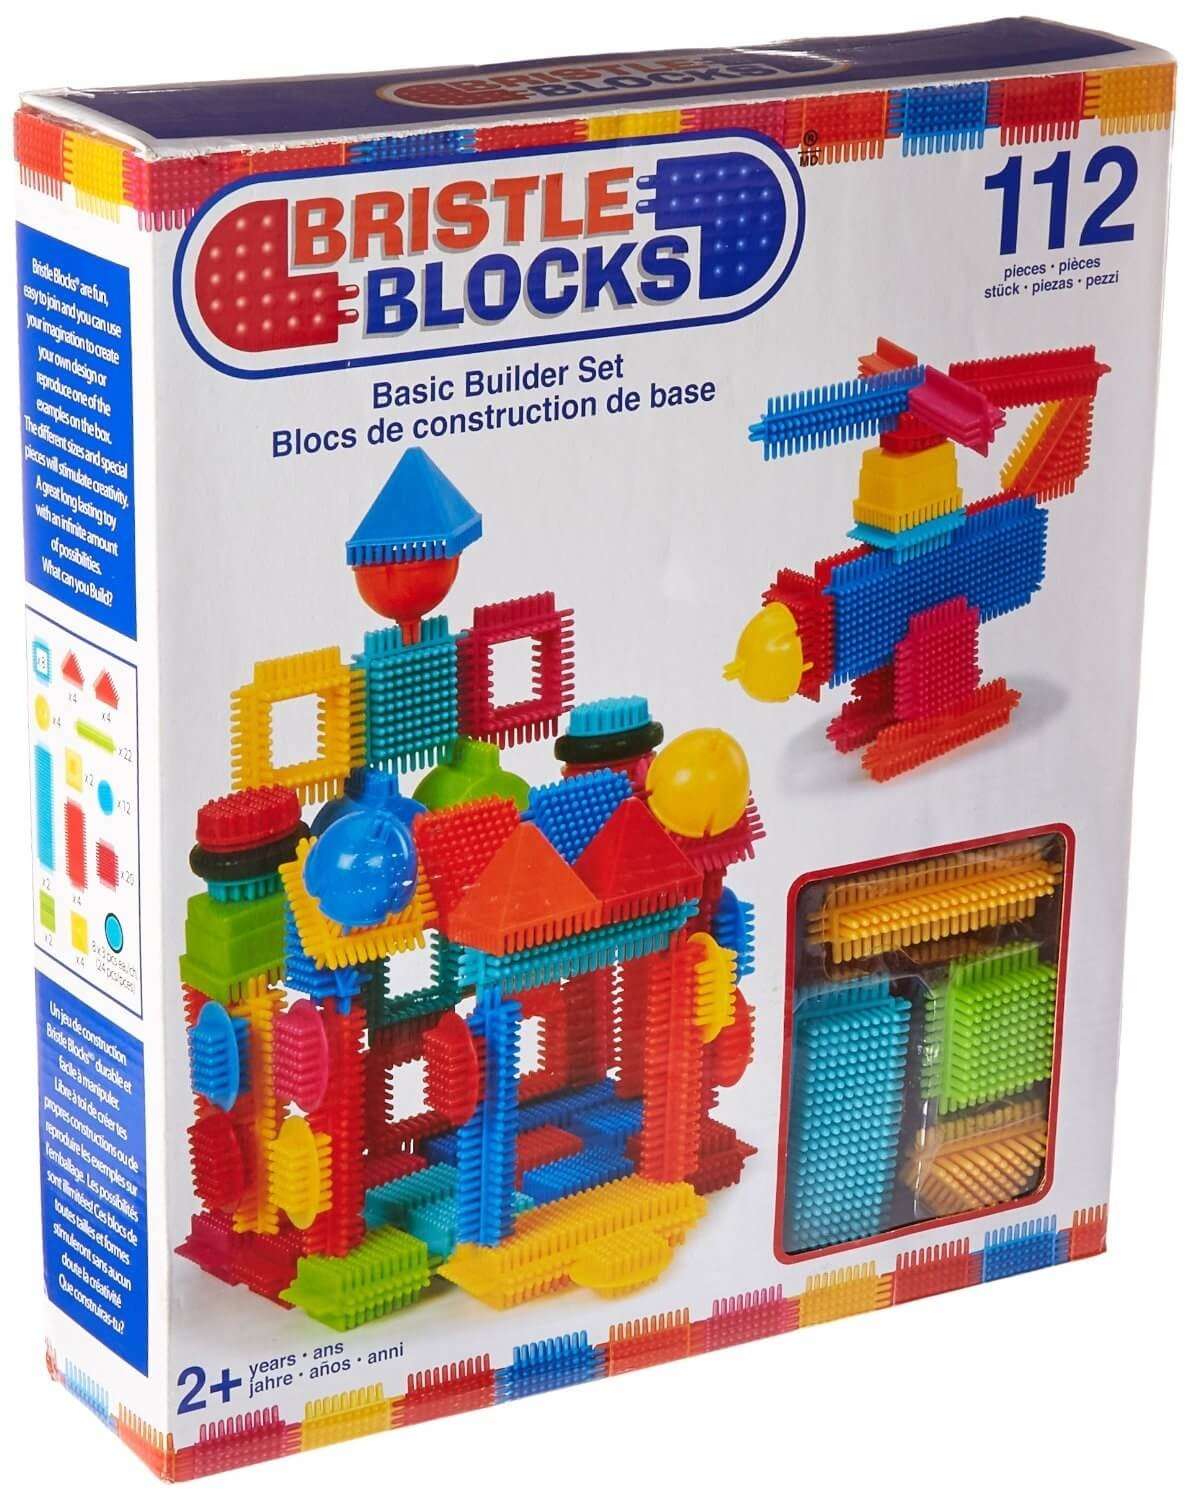 toy blocks that connect together